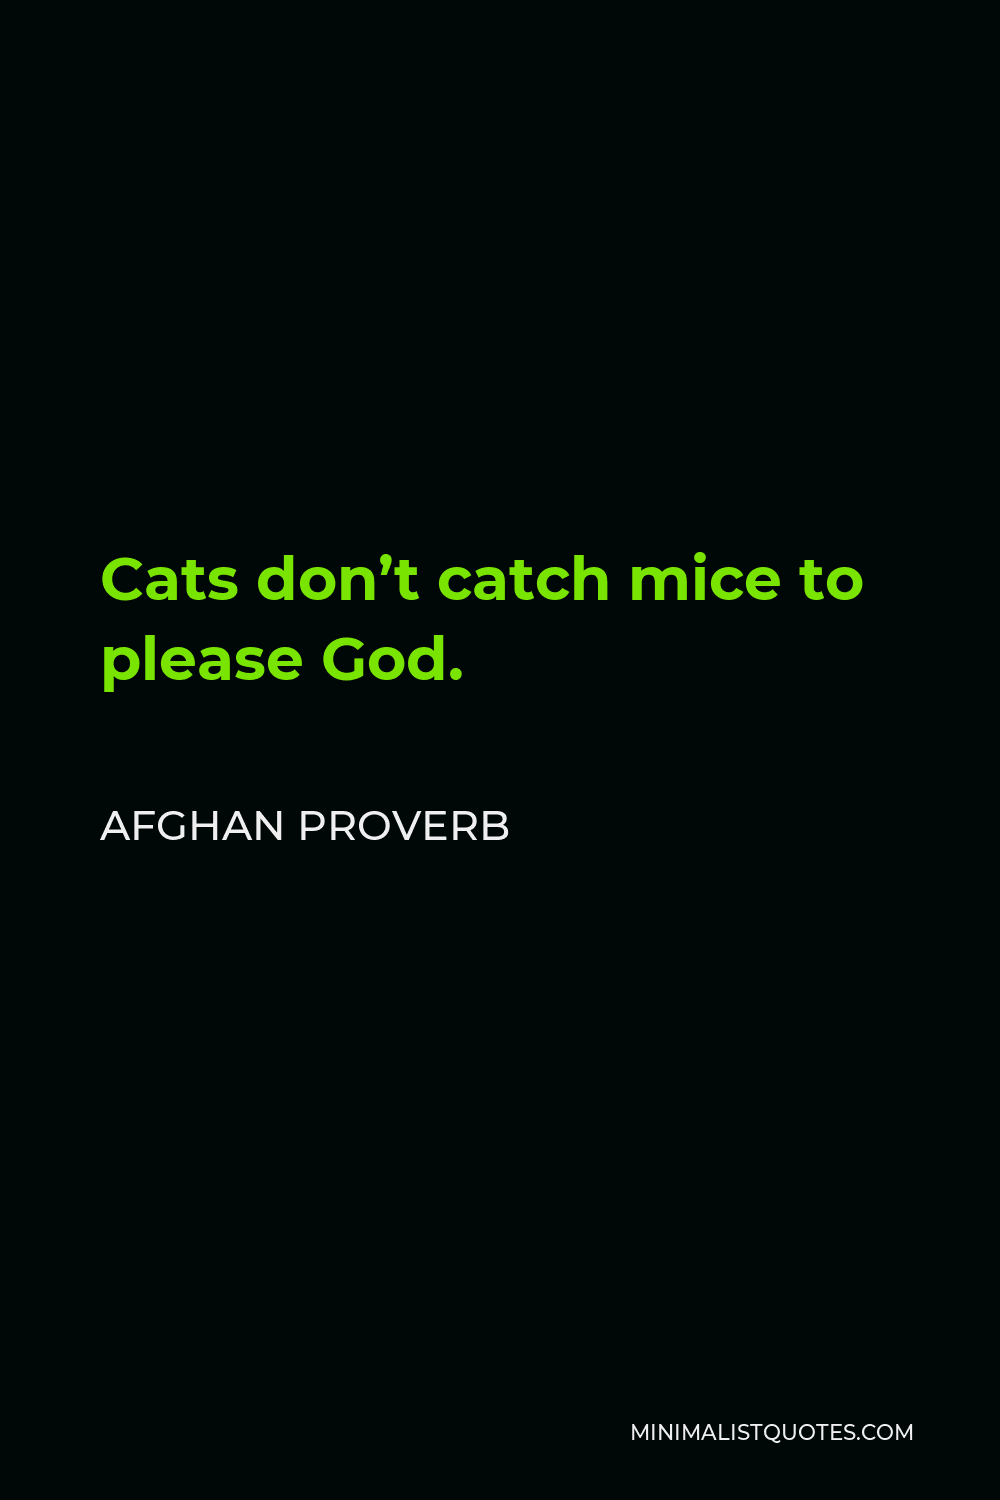 Afghan Proverb Quote - Cats don’t catch mice to please God.